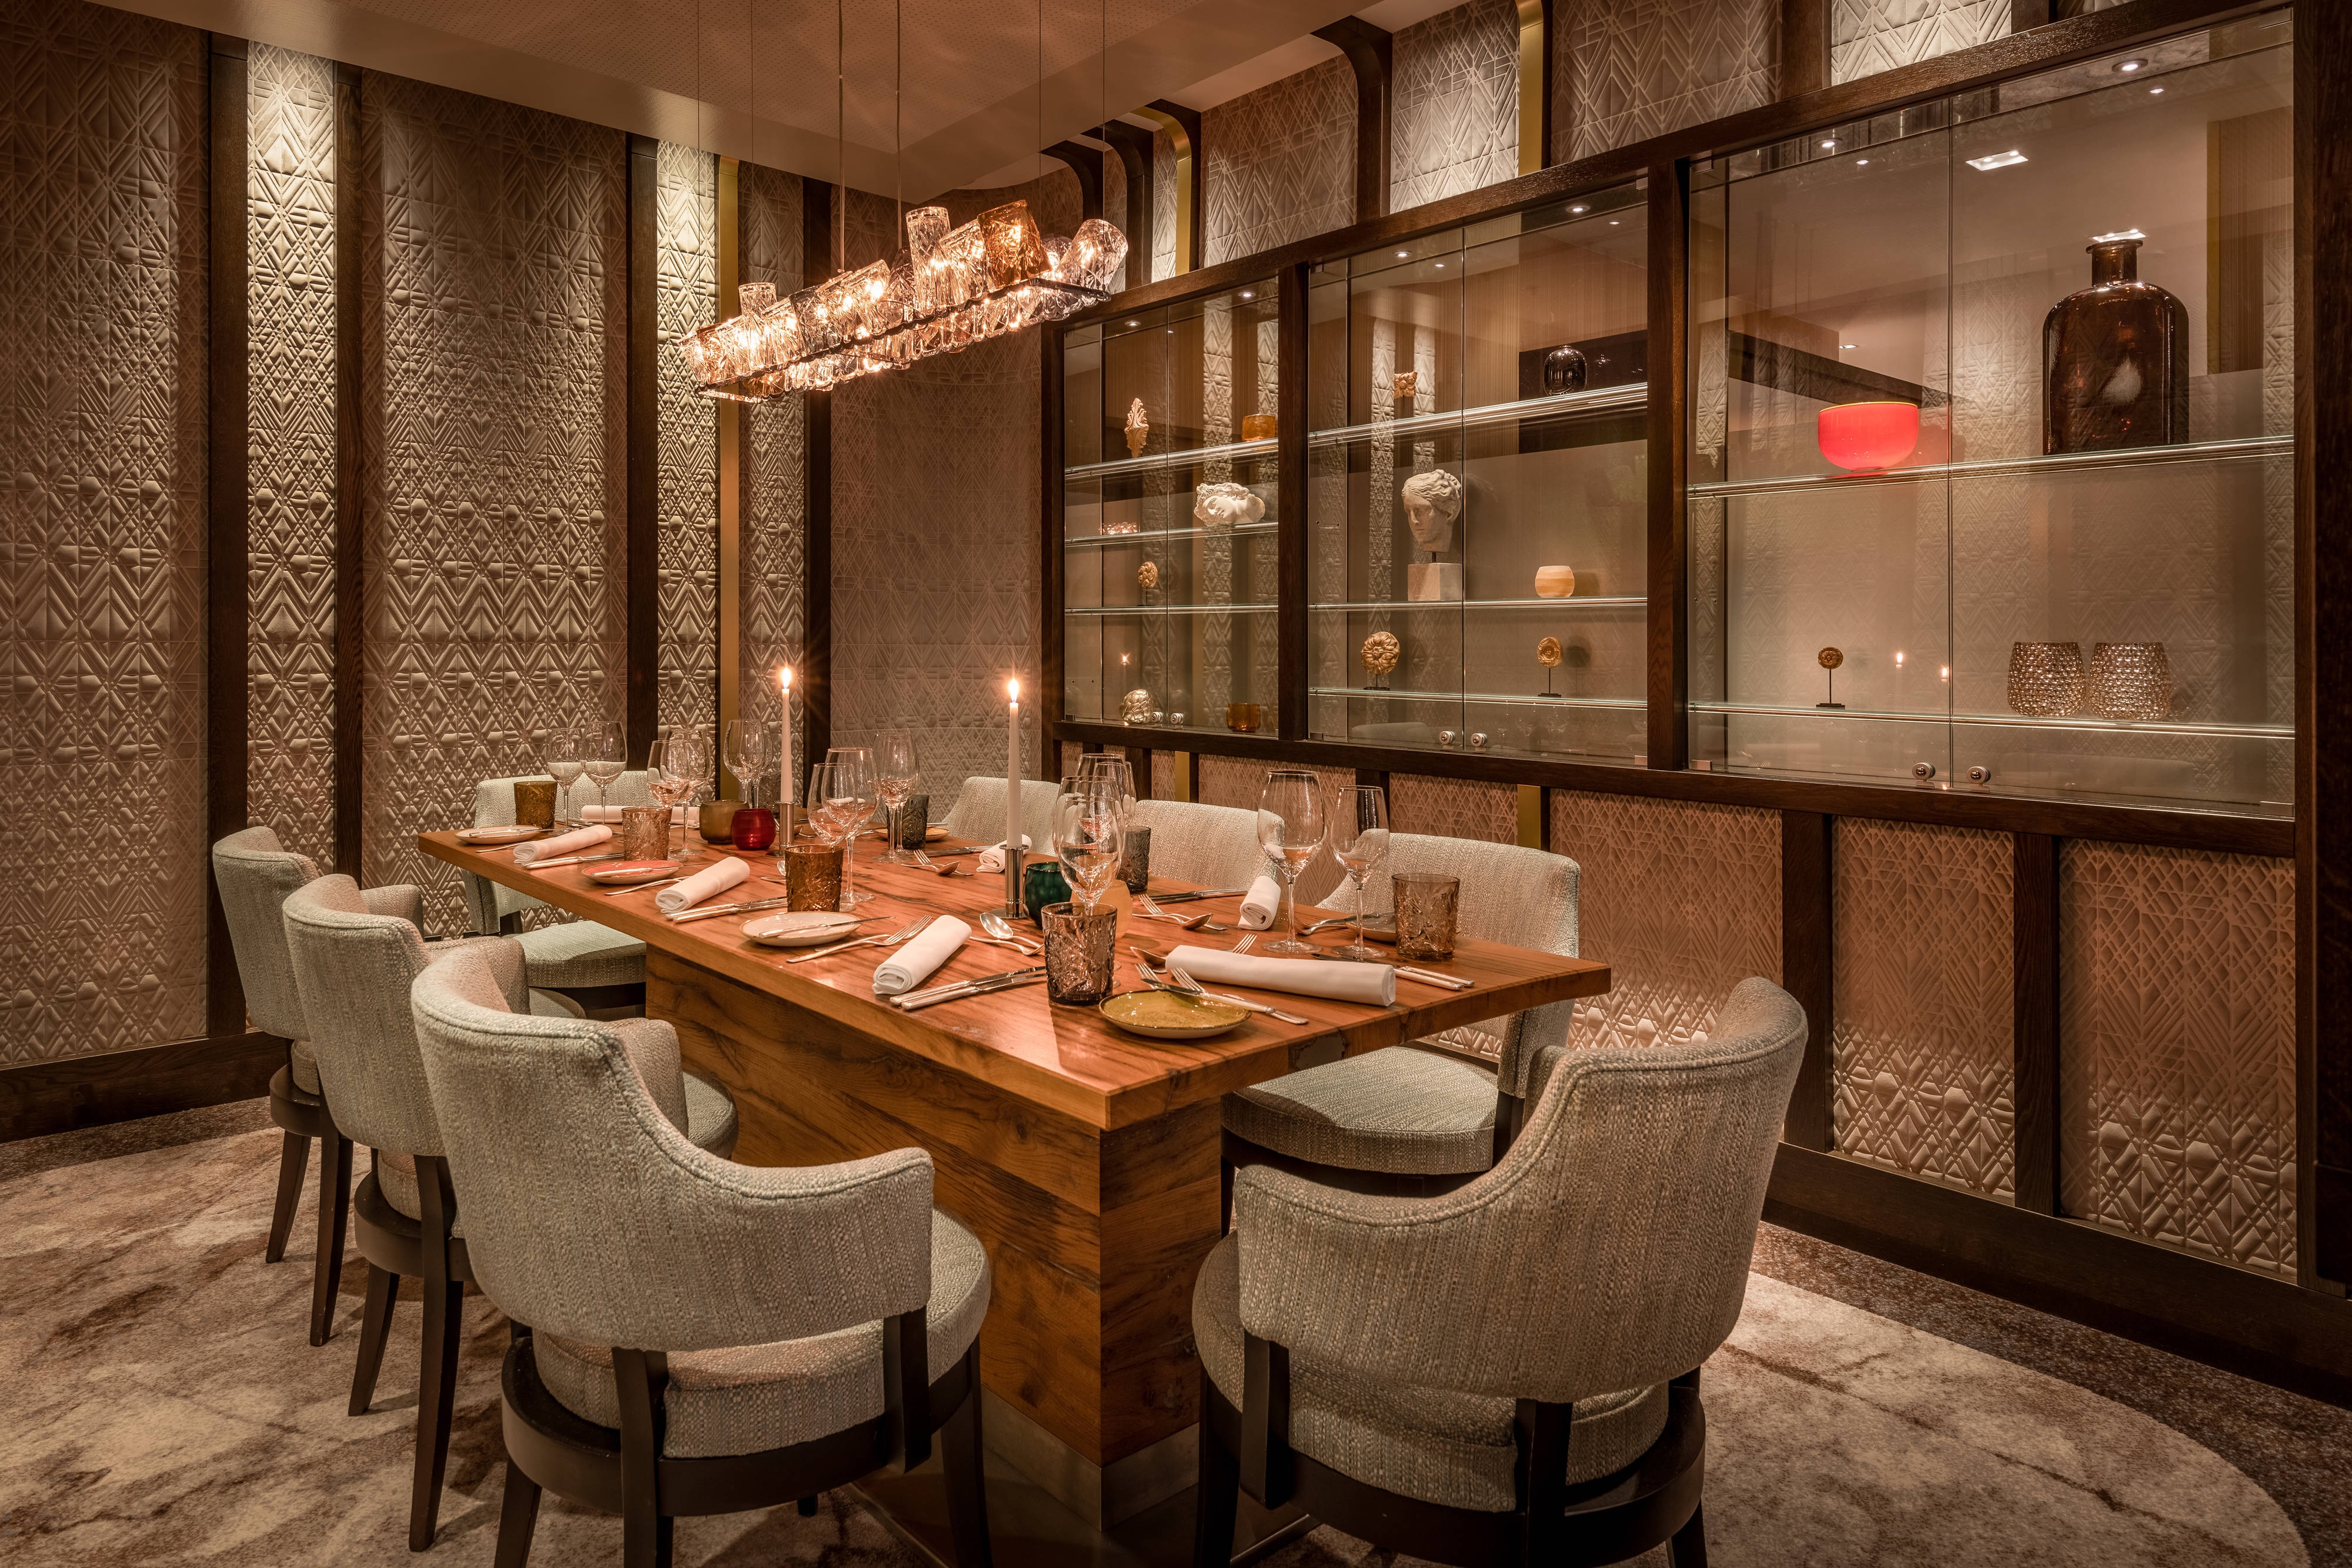 Parkring Restaurant - Private Dining Room